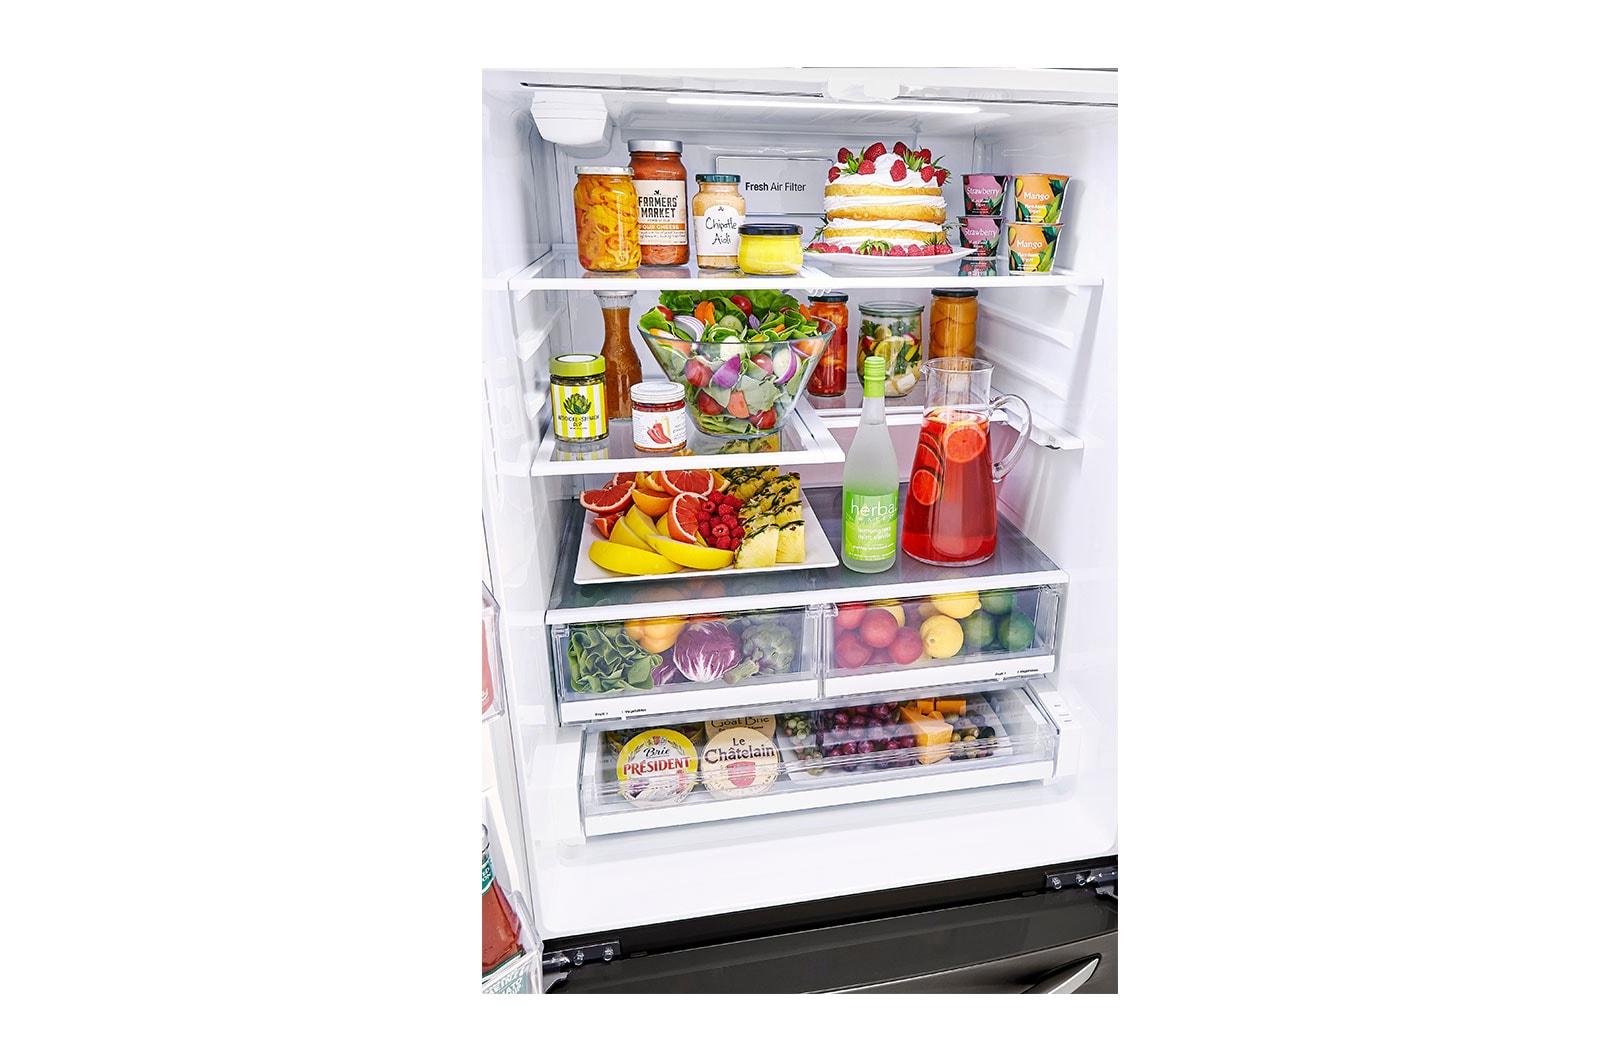 25 cu. ft. Smart Wi-Fi Enabled French Door Refrigerator